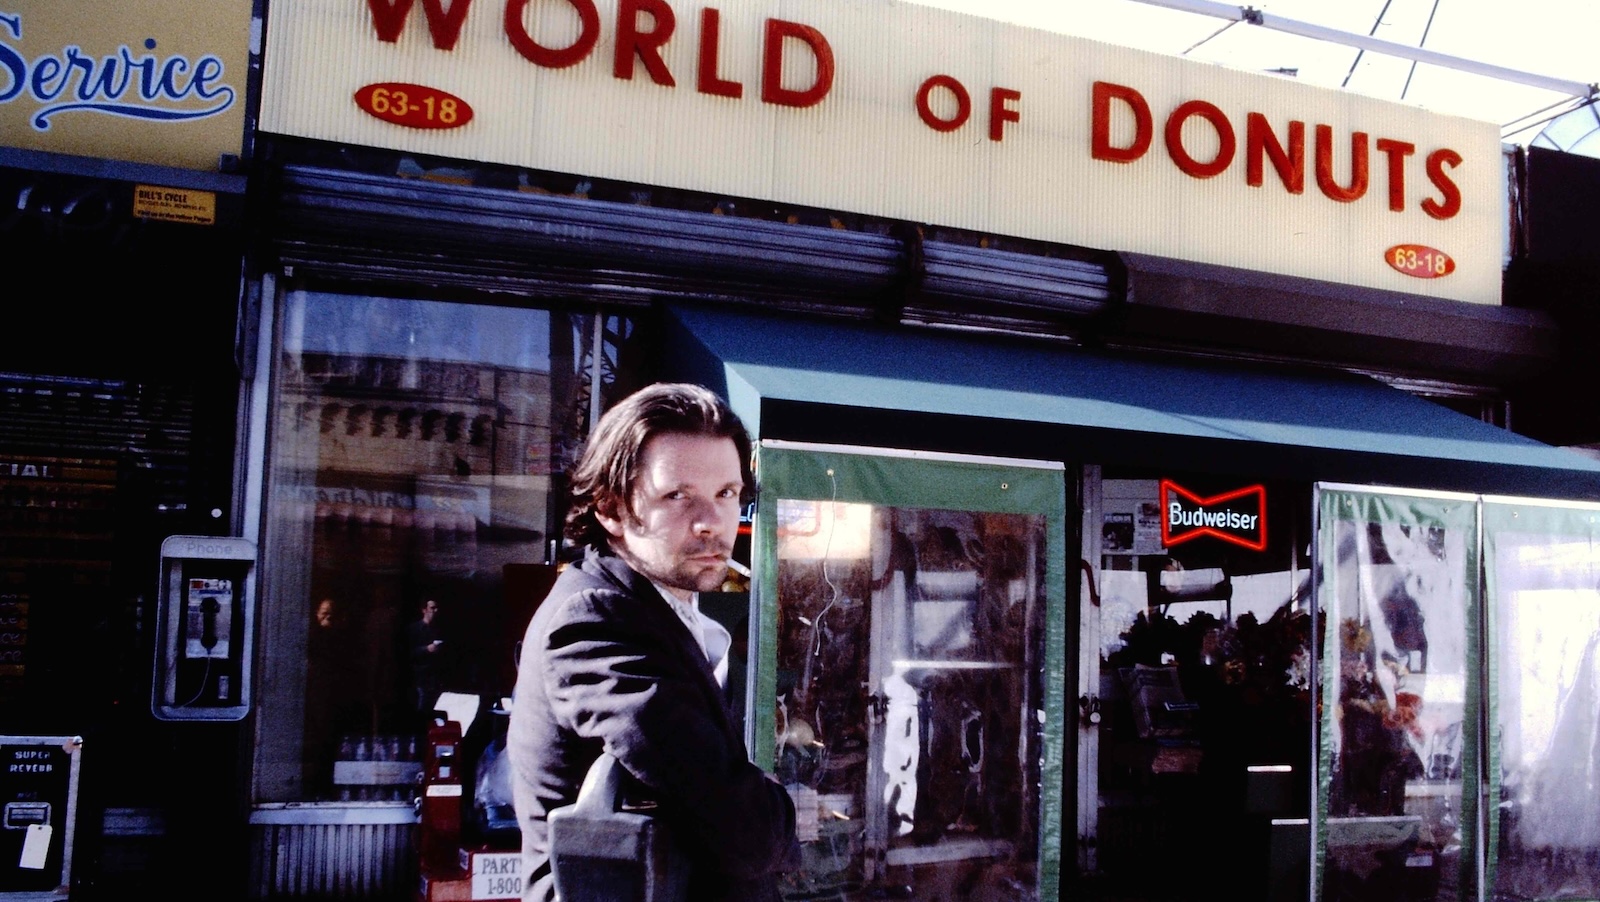 A man with a cigarette in his mouth looks at camera and stands outside a store with the name WORLD OF DONUTS.